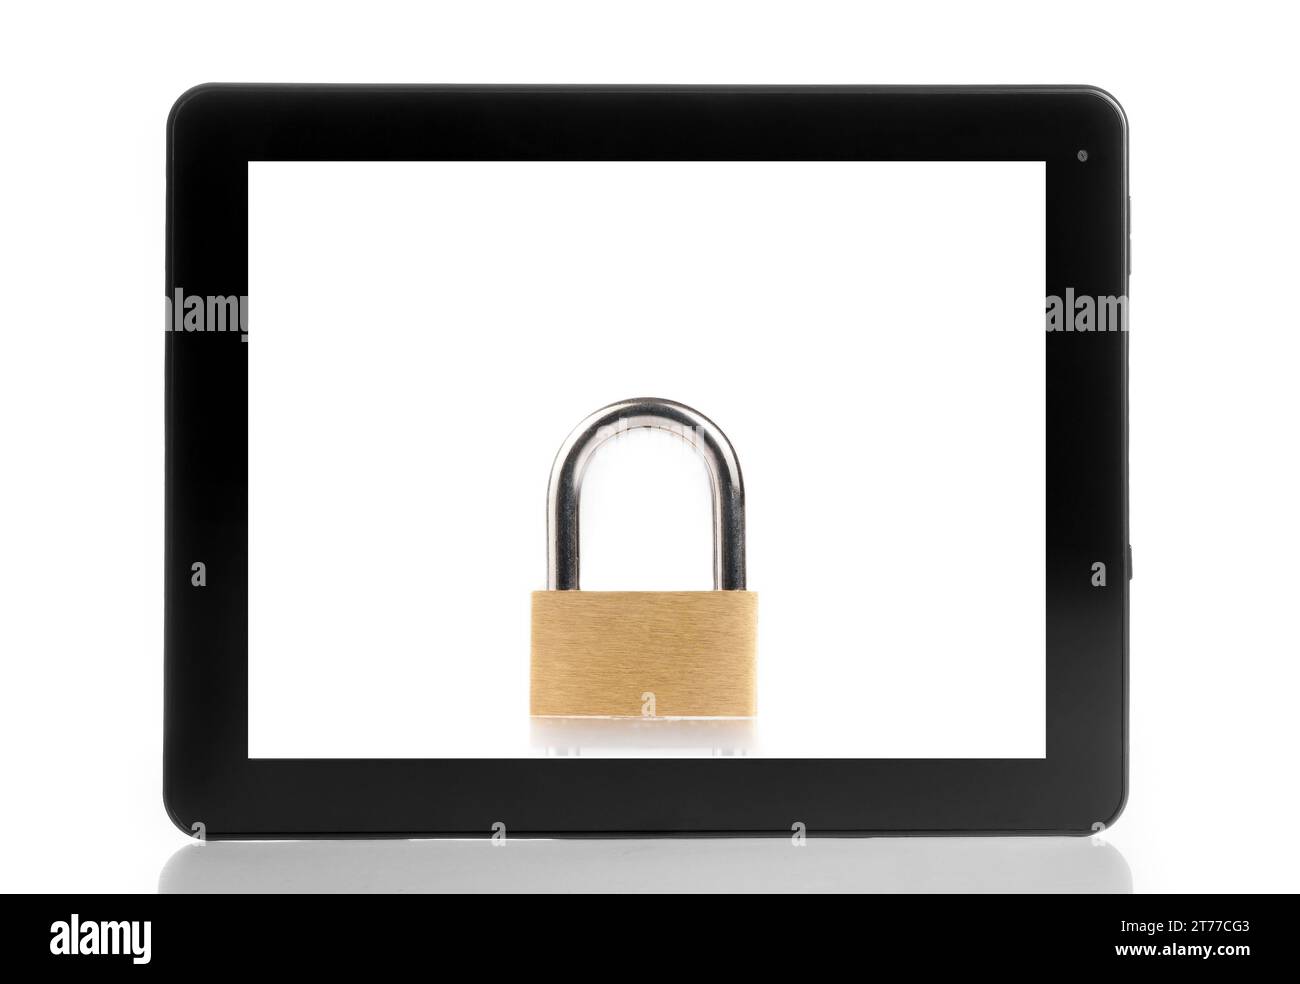 lock inside digital tablet pc on white background, internet security concept; lock inside digital tablet pc on white background, internet security concept Stock Photo